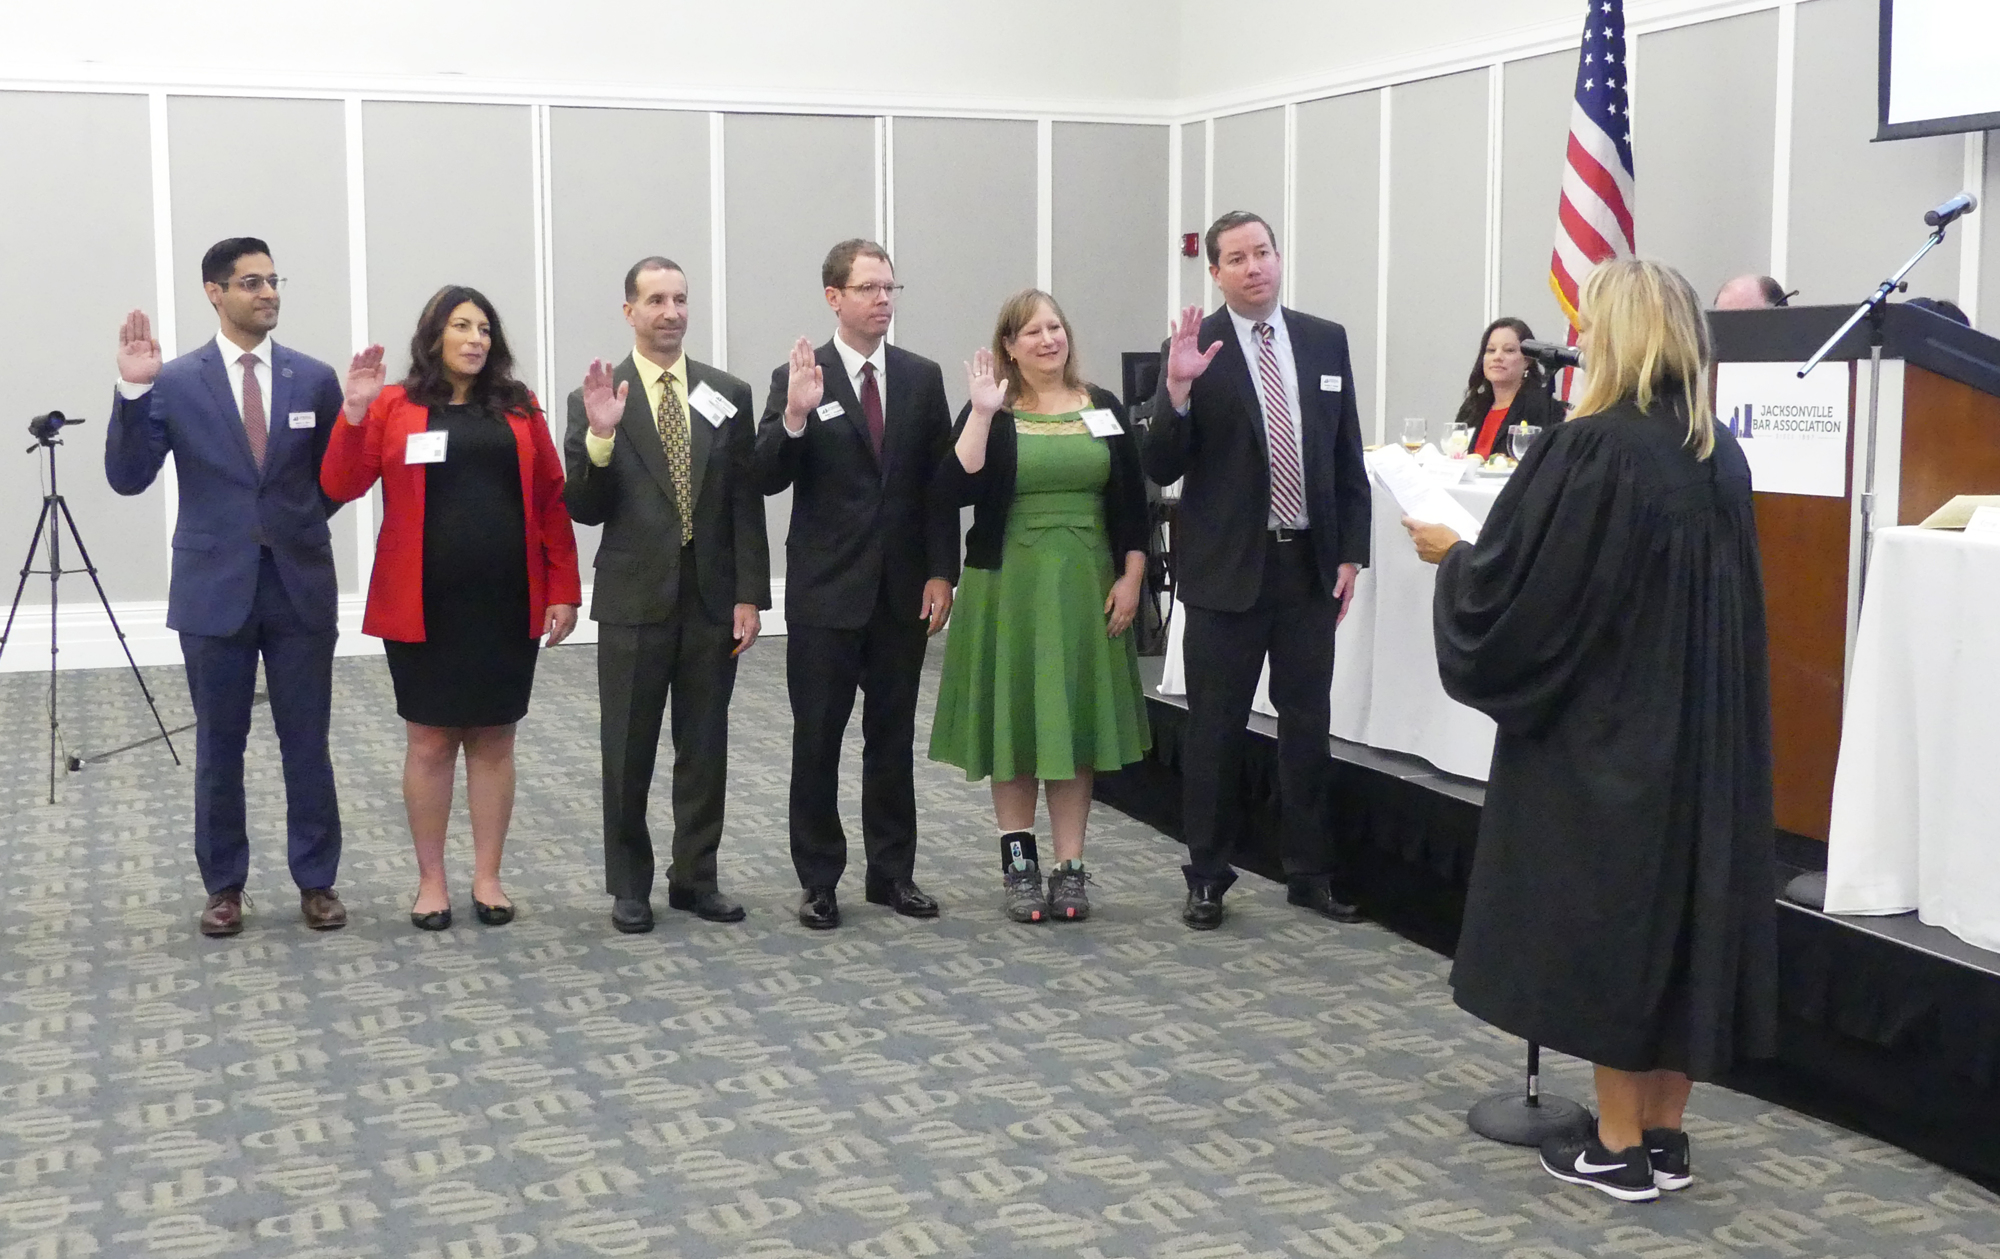 Members of the Jacksonville Bar Association 2019-20 board of governors, from left, Asghar Syed, Jamie Karpman, Blane McCarthy, Brian Coughlin, Adina Pollan and Christian George are sworn in by Circuit Judge Katie Dearing.